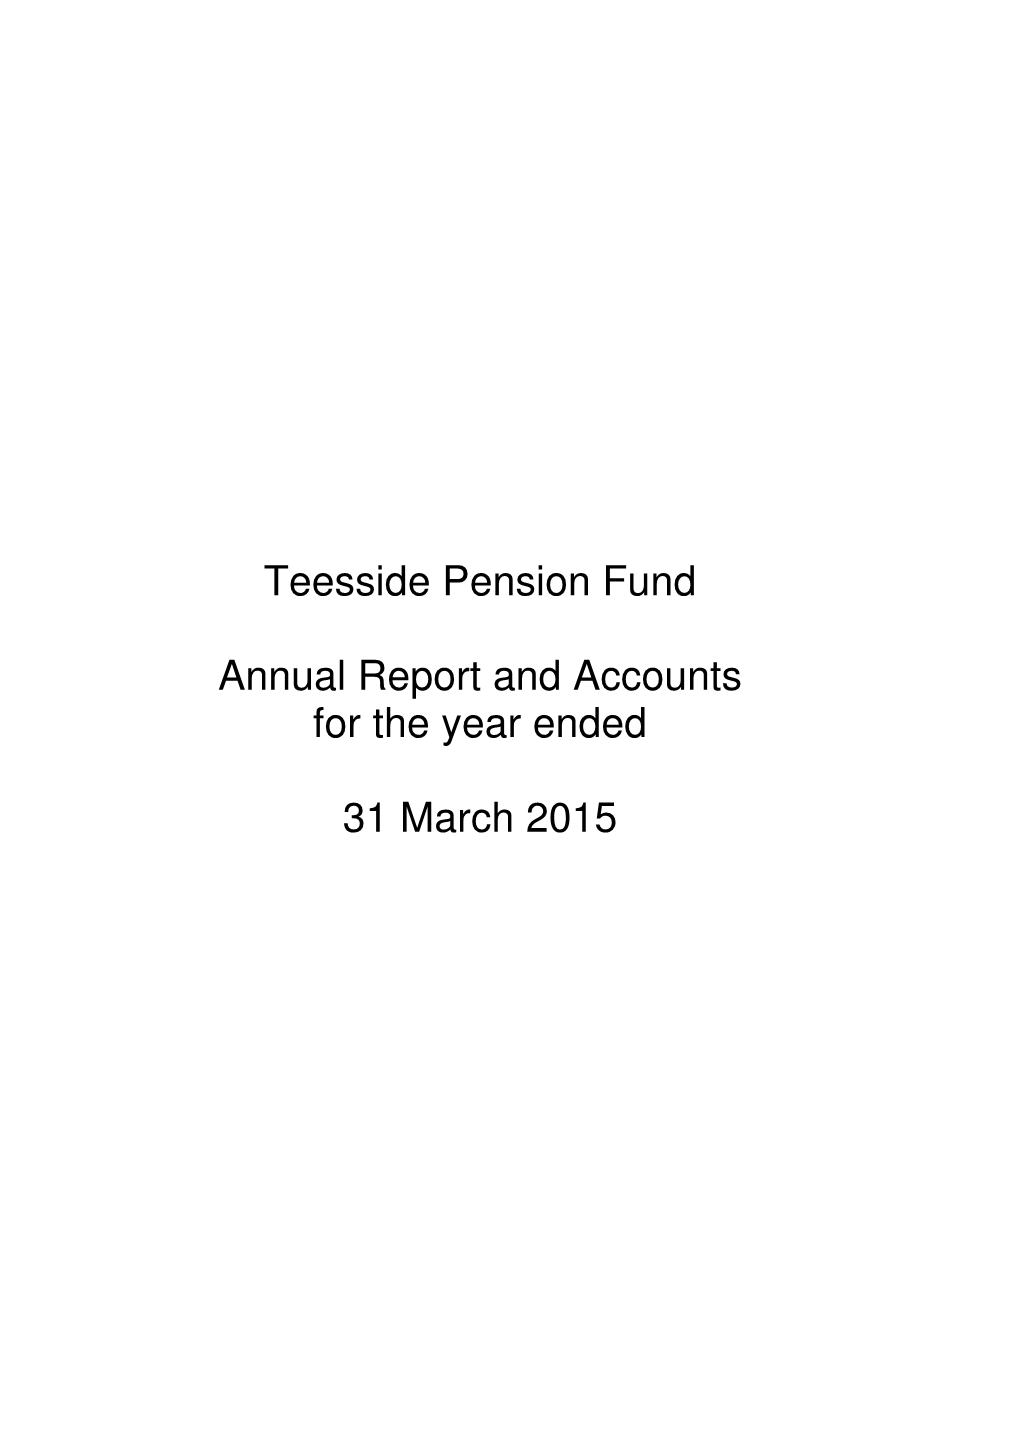 Teesside Pension Fund Annual Report and Accounts for the Year